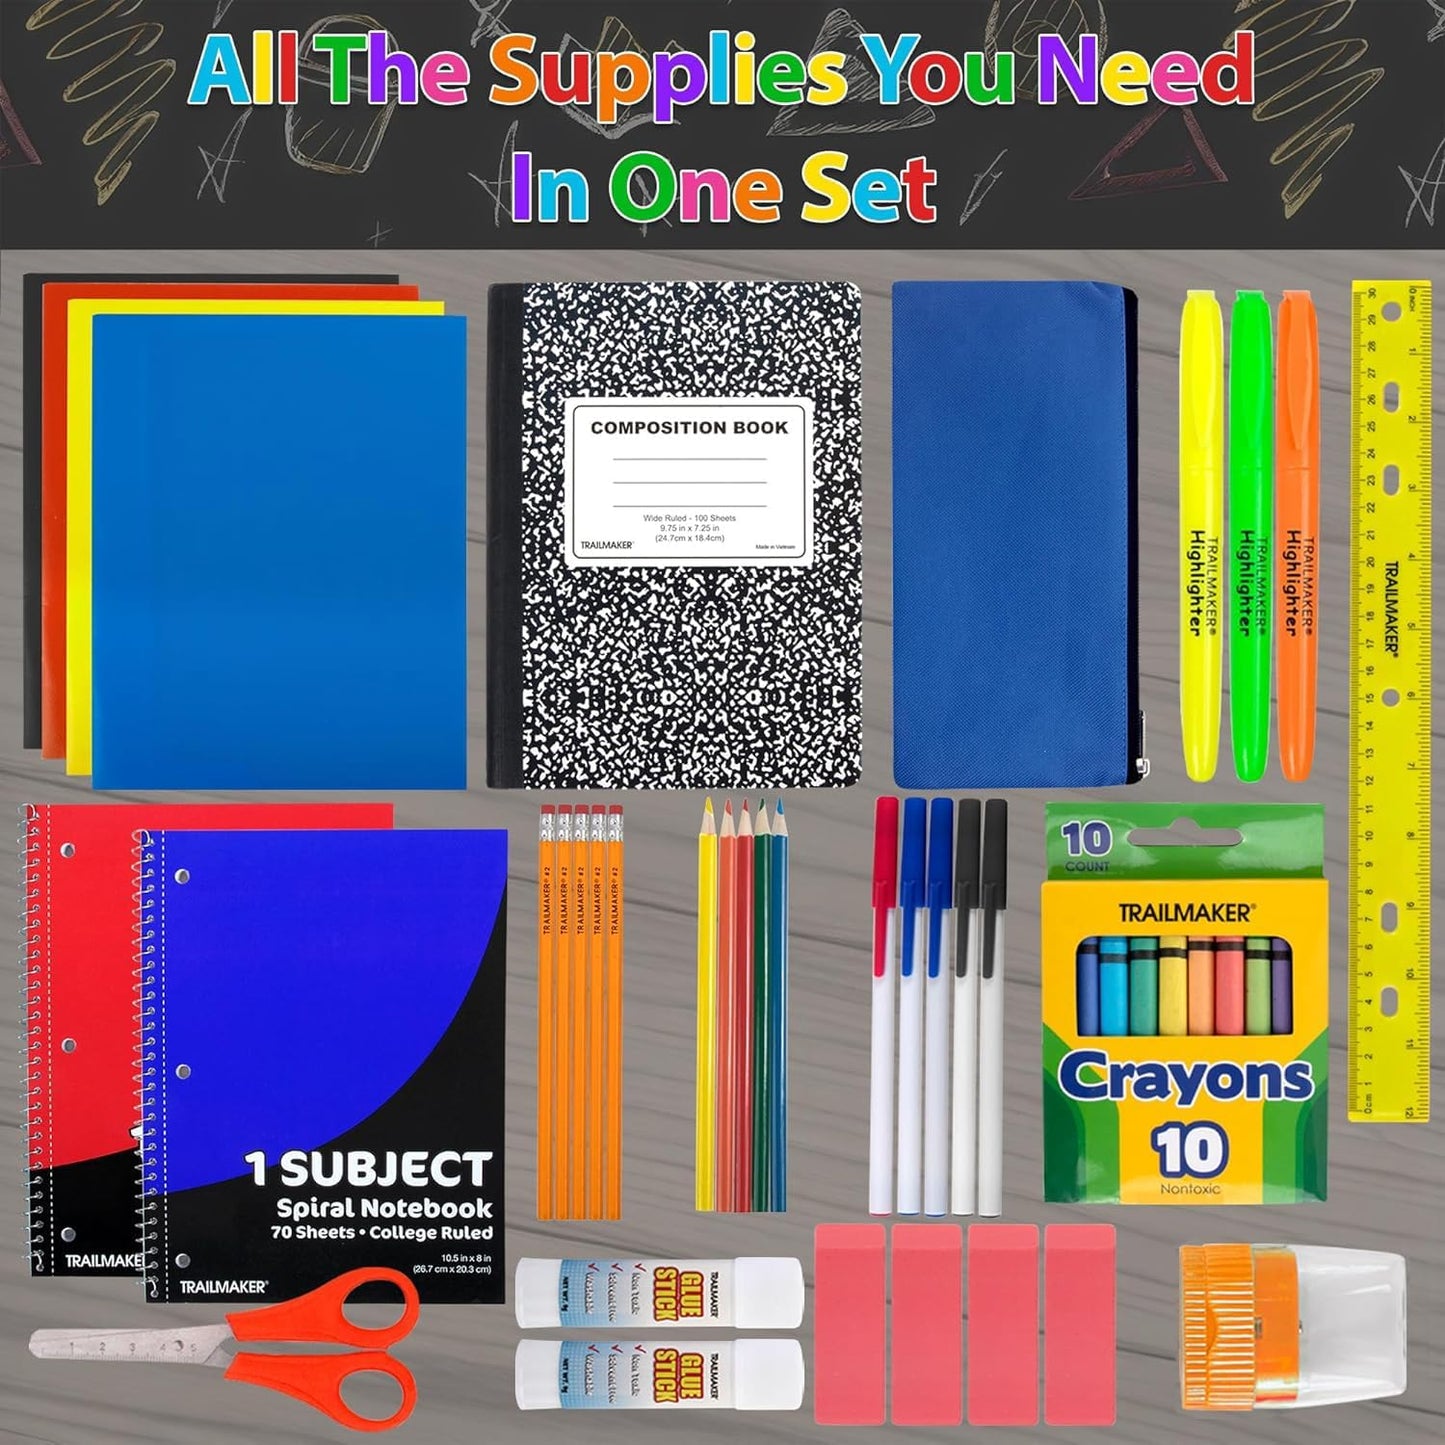 45 Piece School Supply Kit Grades K-12 - School Essentials Includes Folders Notebooks Pencils Pens and Much More!